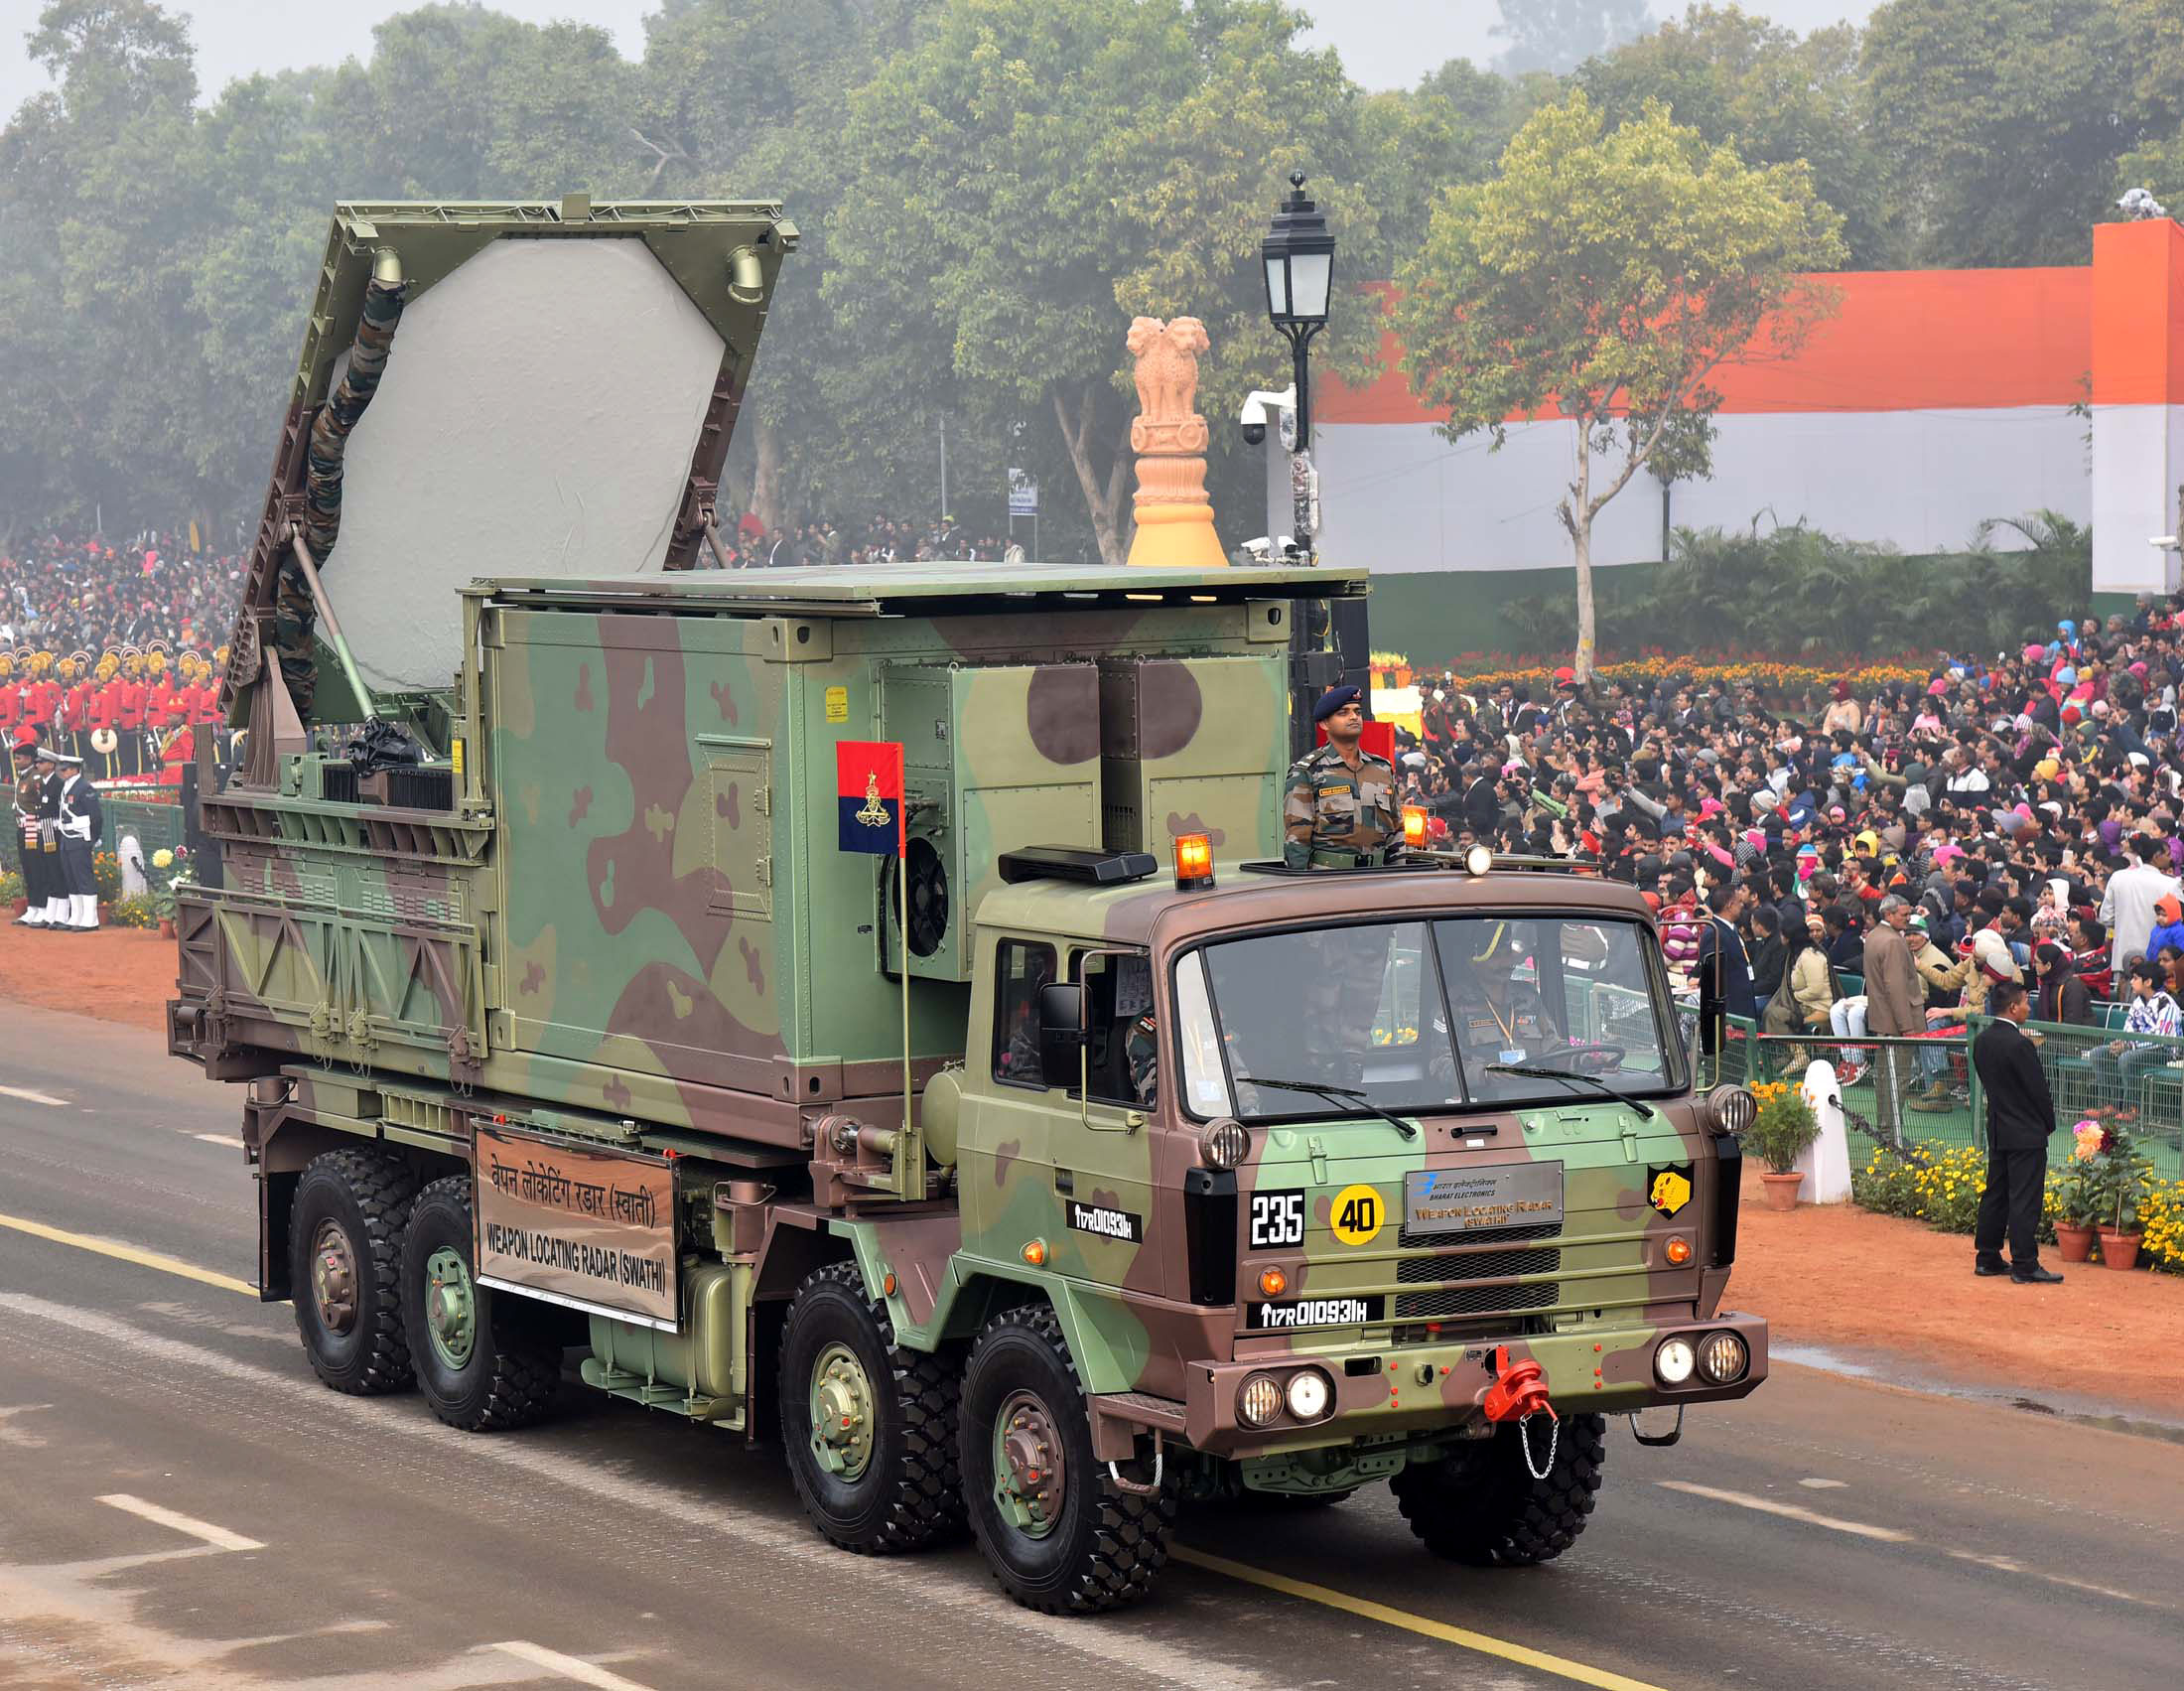 Weapon_Locating_Radar_(Swathi)_passes_through_the_Rajpath,_on_the_occasion_of_the_69th_Republi...jpg